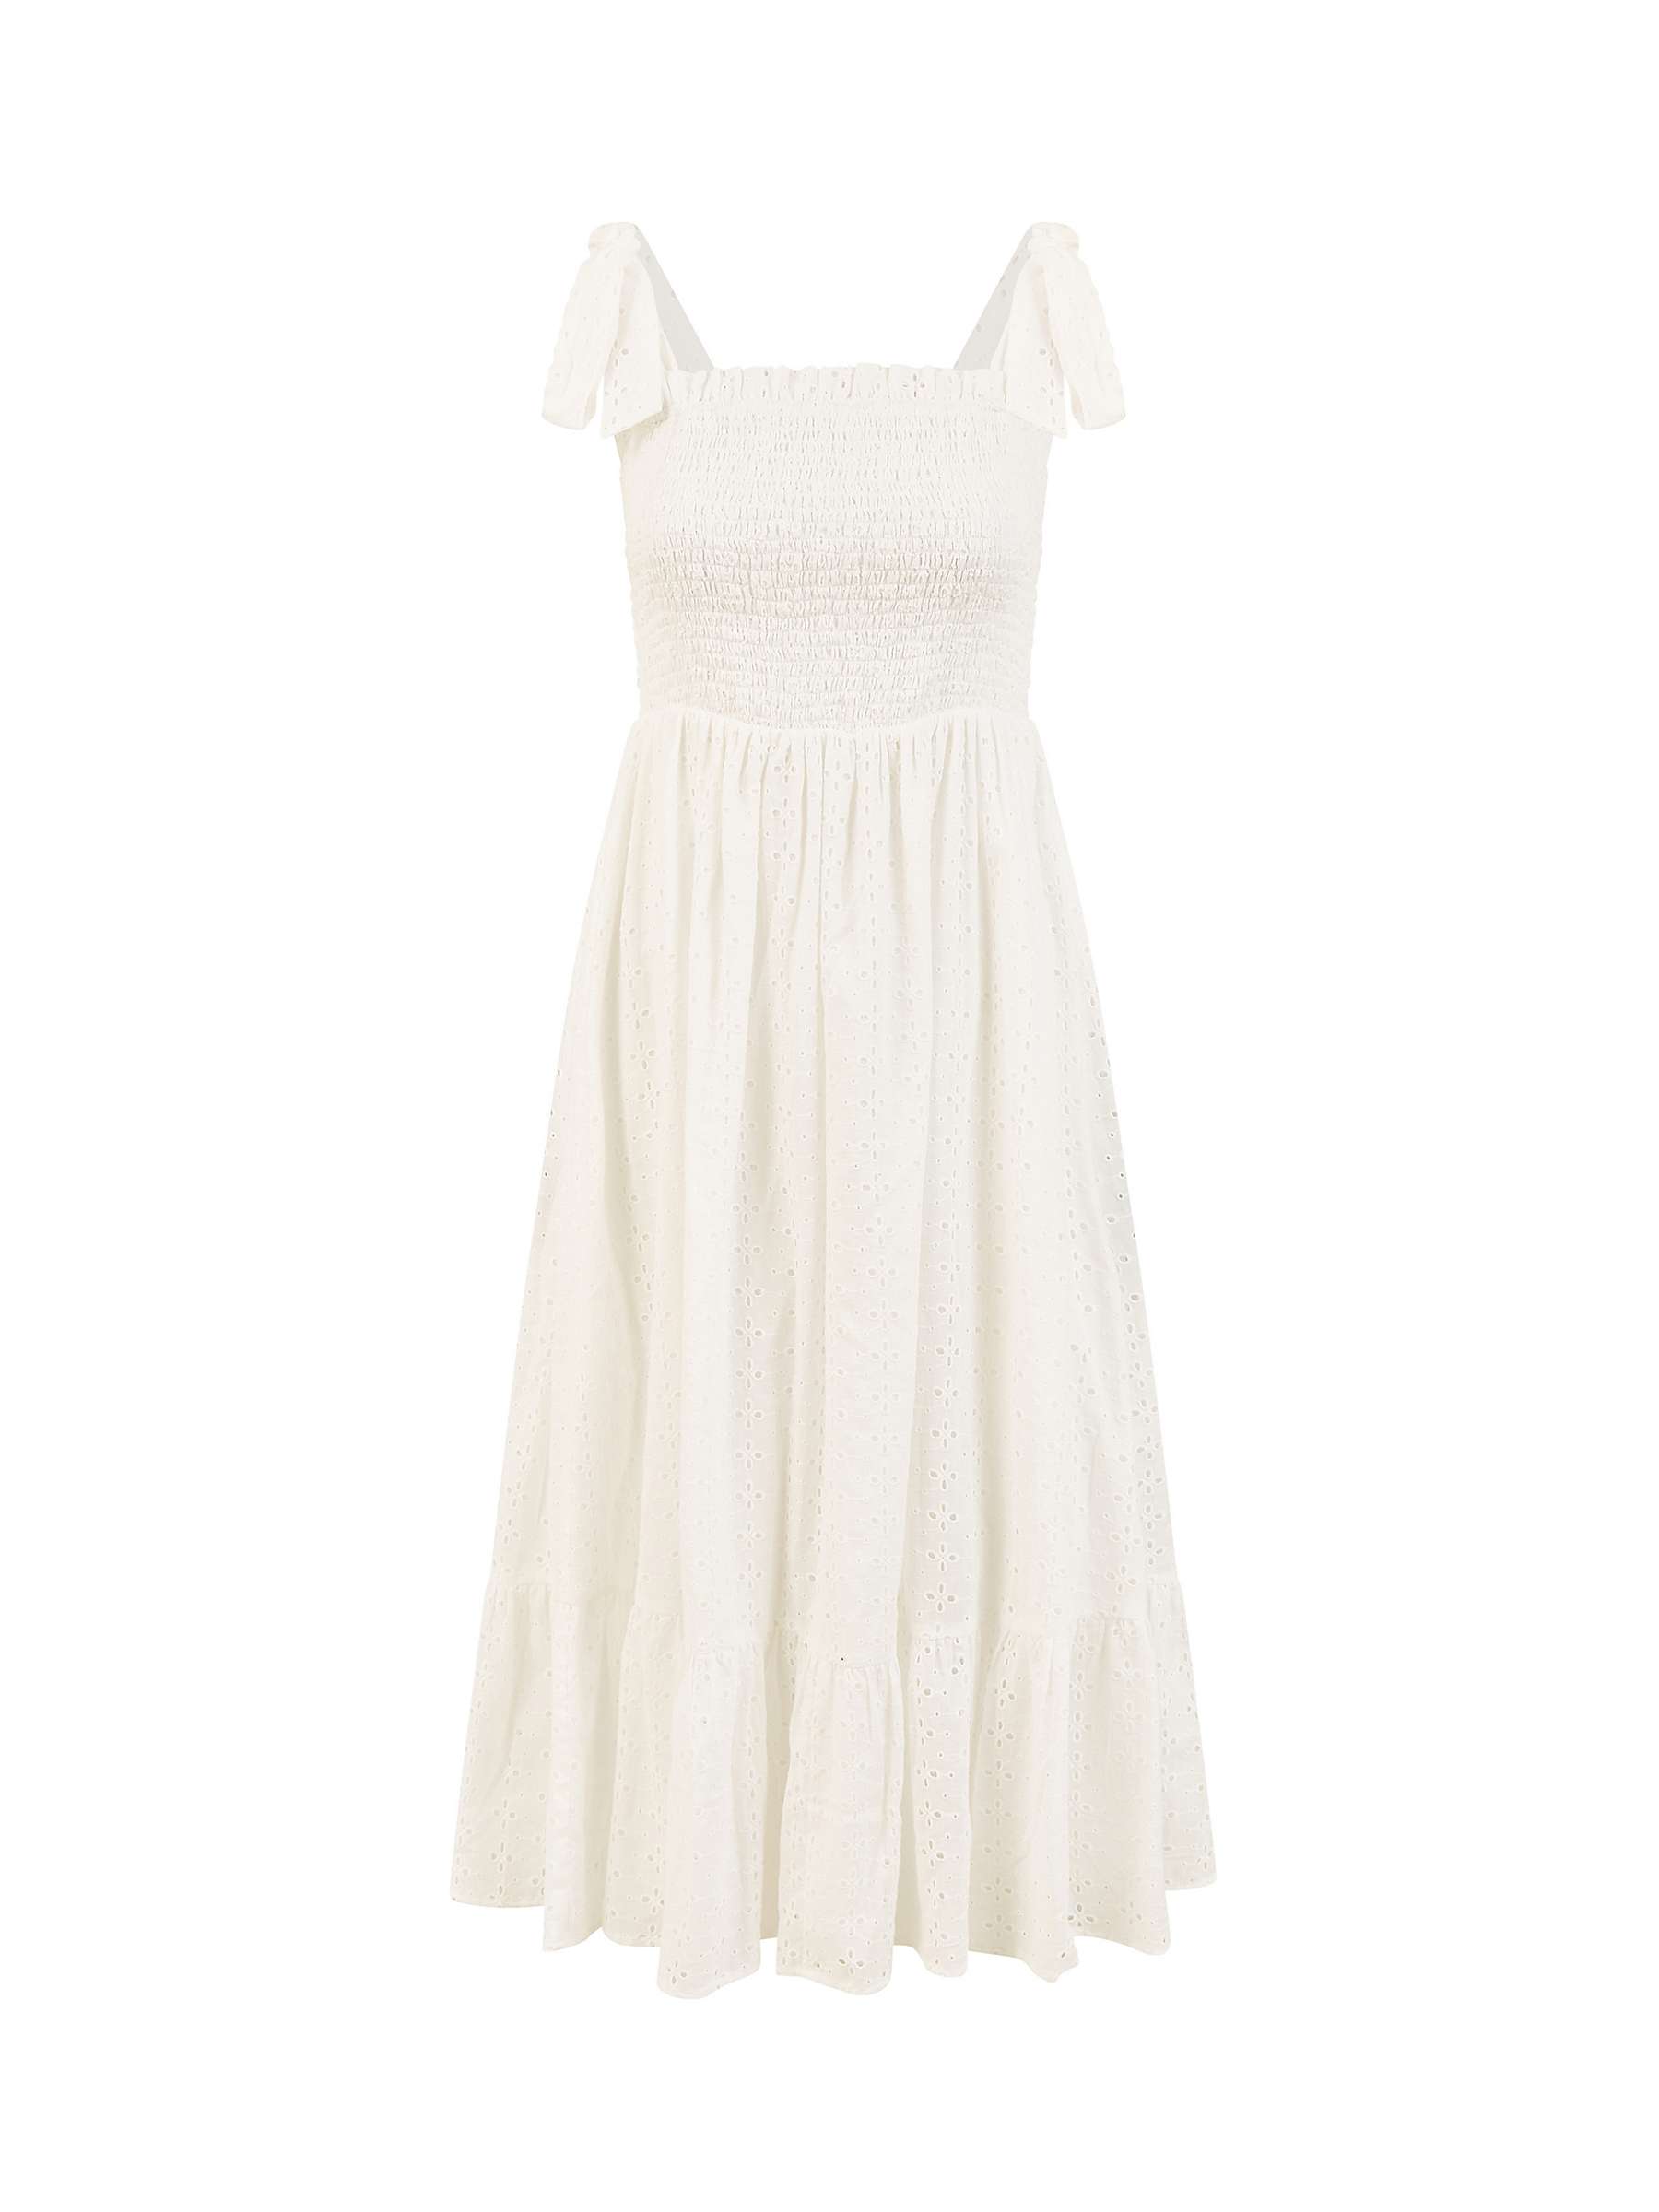 Buy Yumi Mela London Broderie Anglaise Ruched Midi Sundress, White Online at johnlewis.com